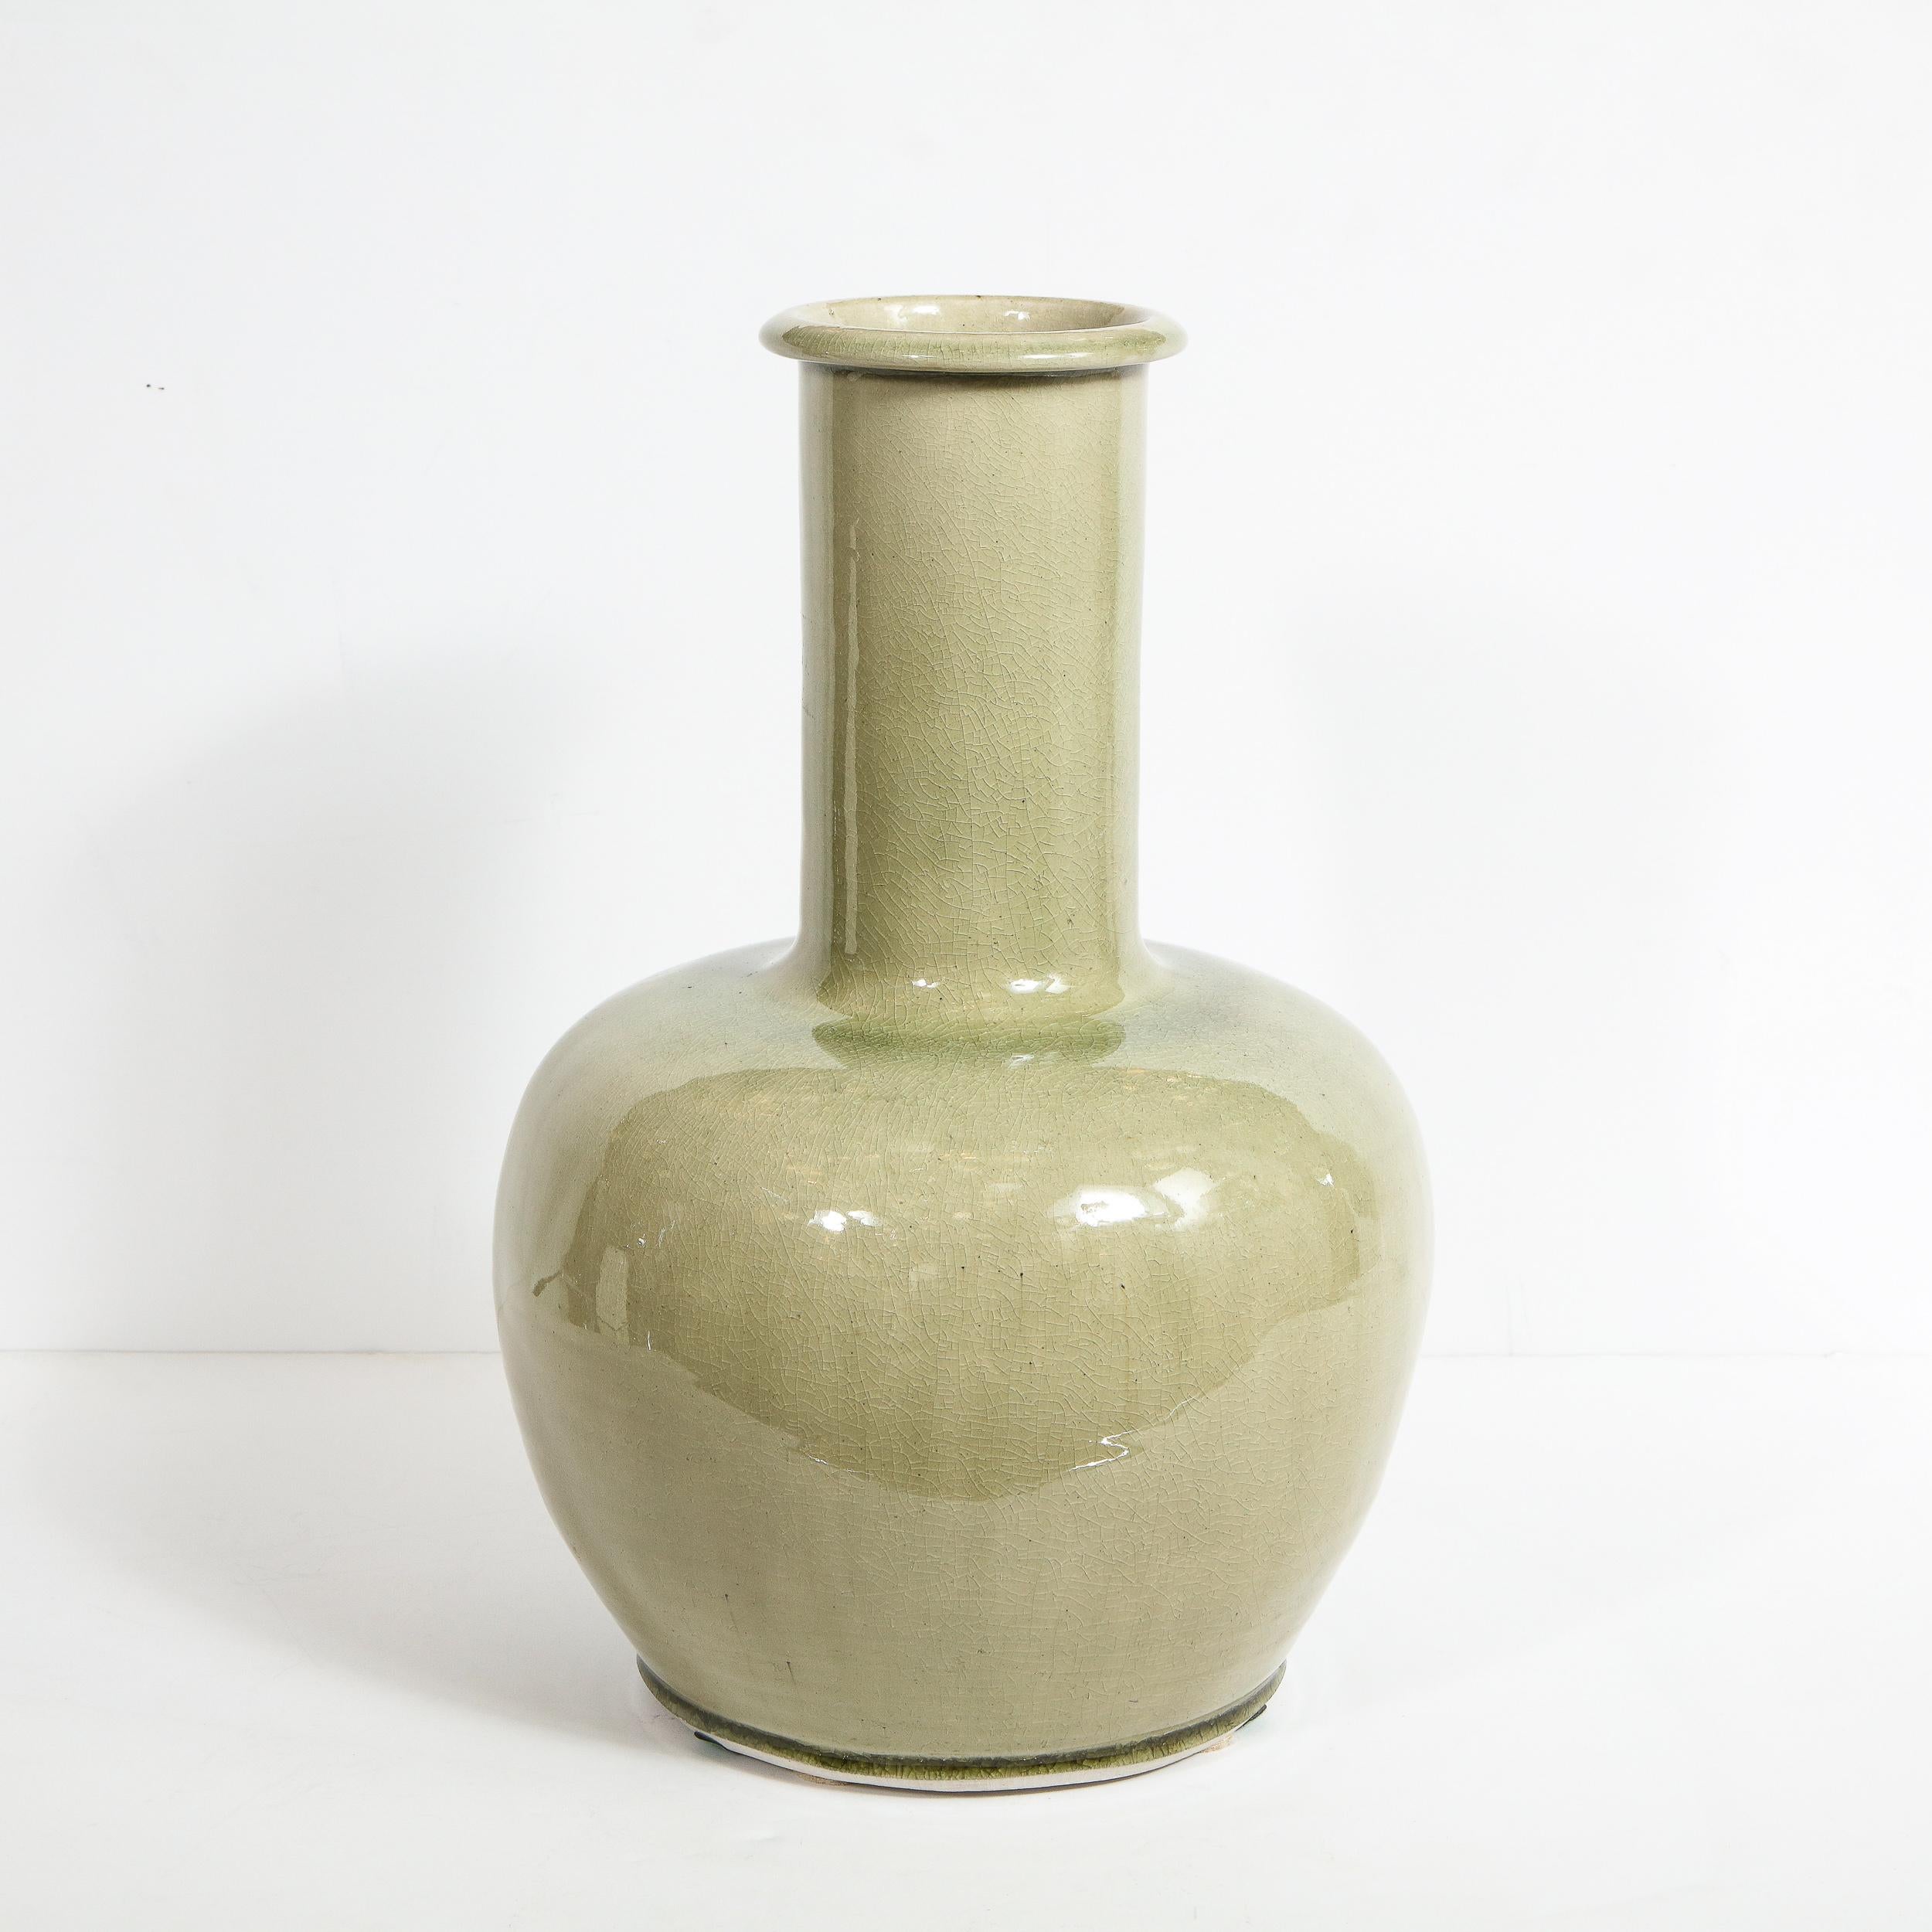 This elegant modernist vase features an organic spherical bottom that tapers to its base, and elongated cylindrical neck, and a raised lip around the circular mouth. The piece offers a lovely craqueleur finish in a sultry sage hue. With its refined